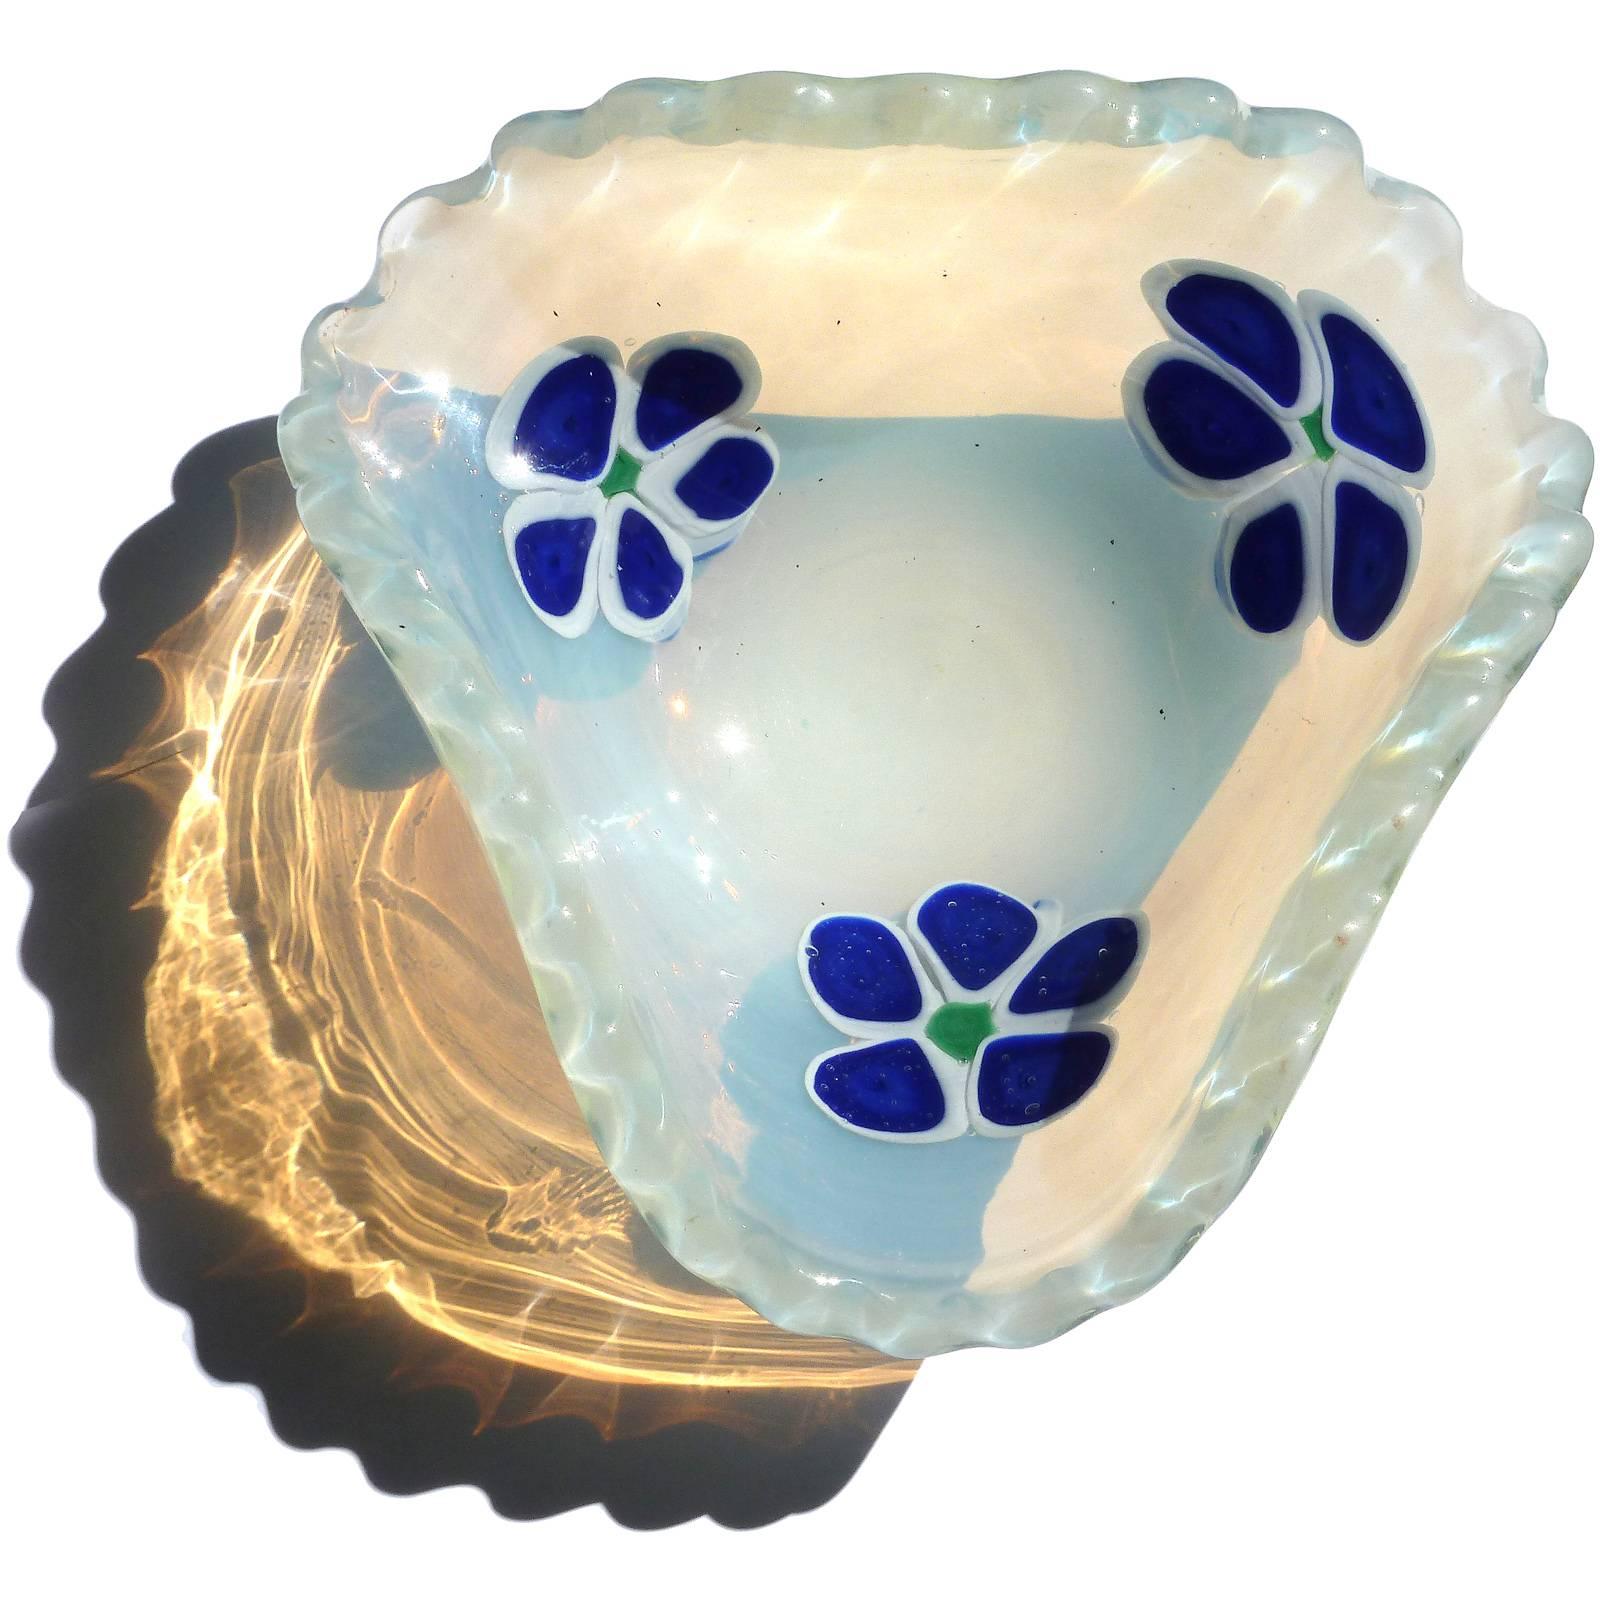 Beautiful vintage Murano hand blown fiery opalescent and blue flowers Italian art glass bowl. Documented to the Fratelli Toso company. It has a scalloped rim with three large cobalt blue flowers, lined in white. They are made of bulls-eye murrines.